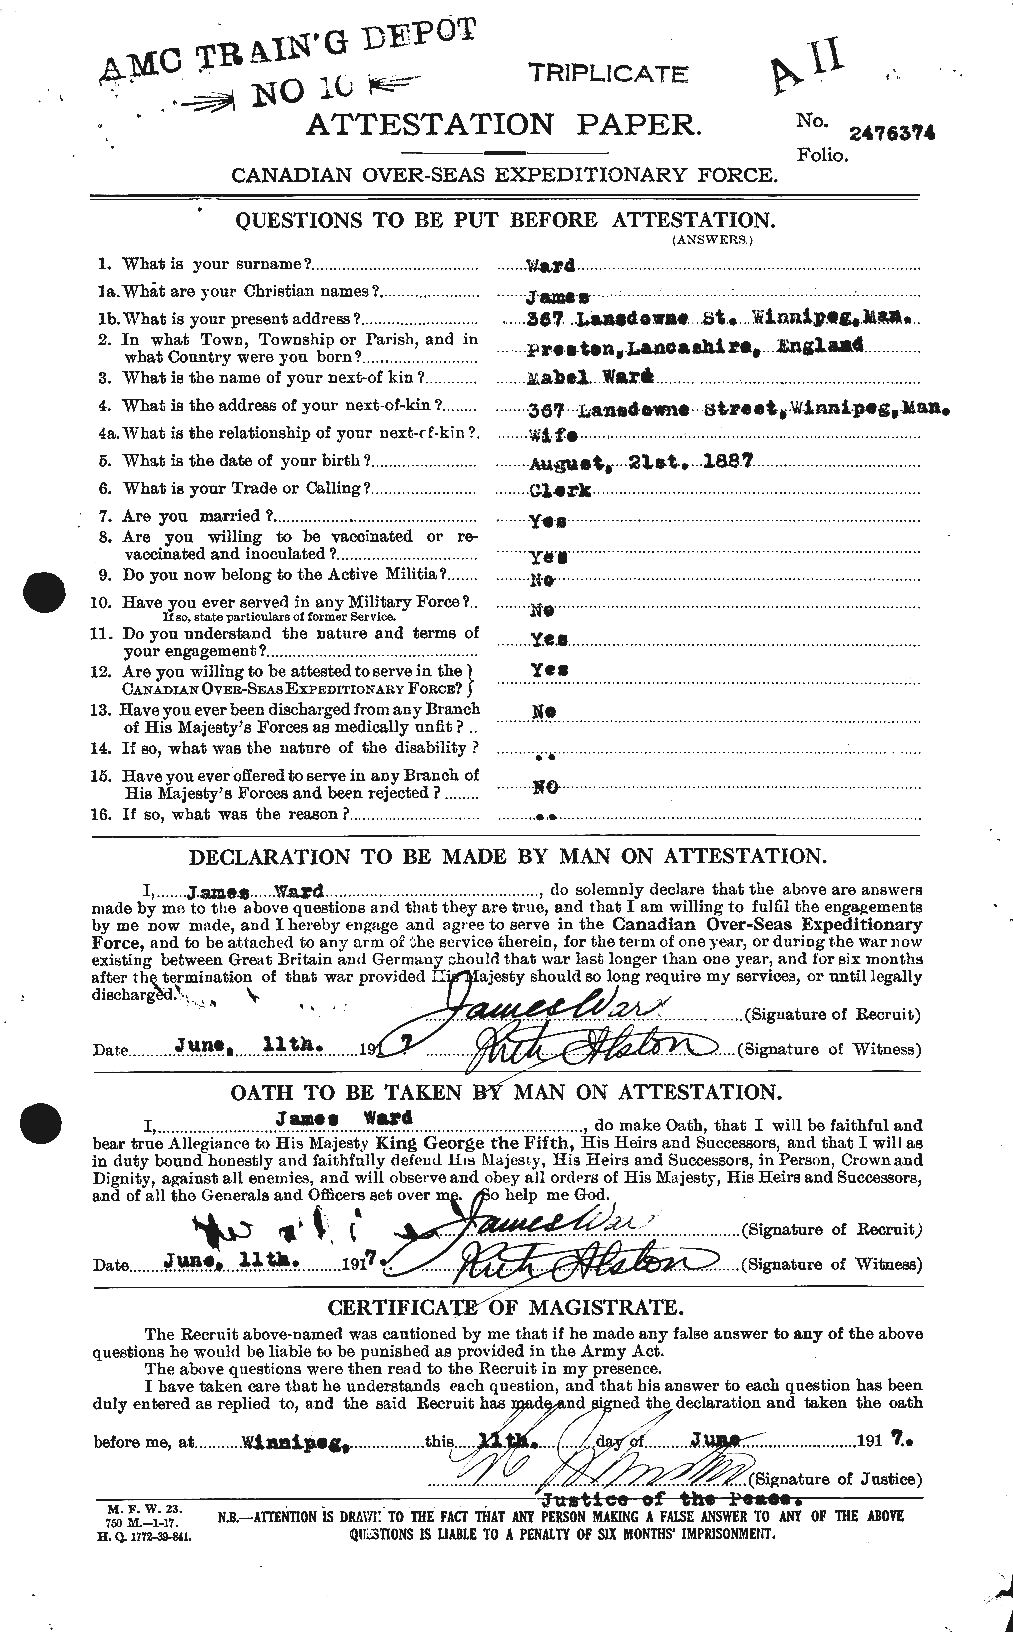 Personnel Records of the First World War - CEF 657876a